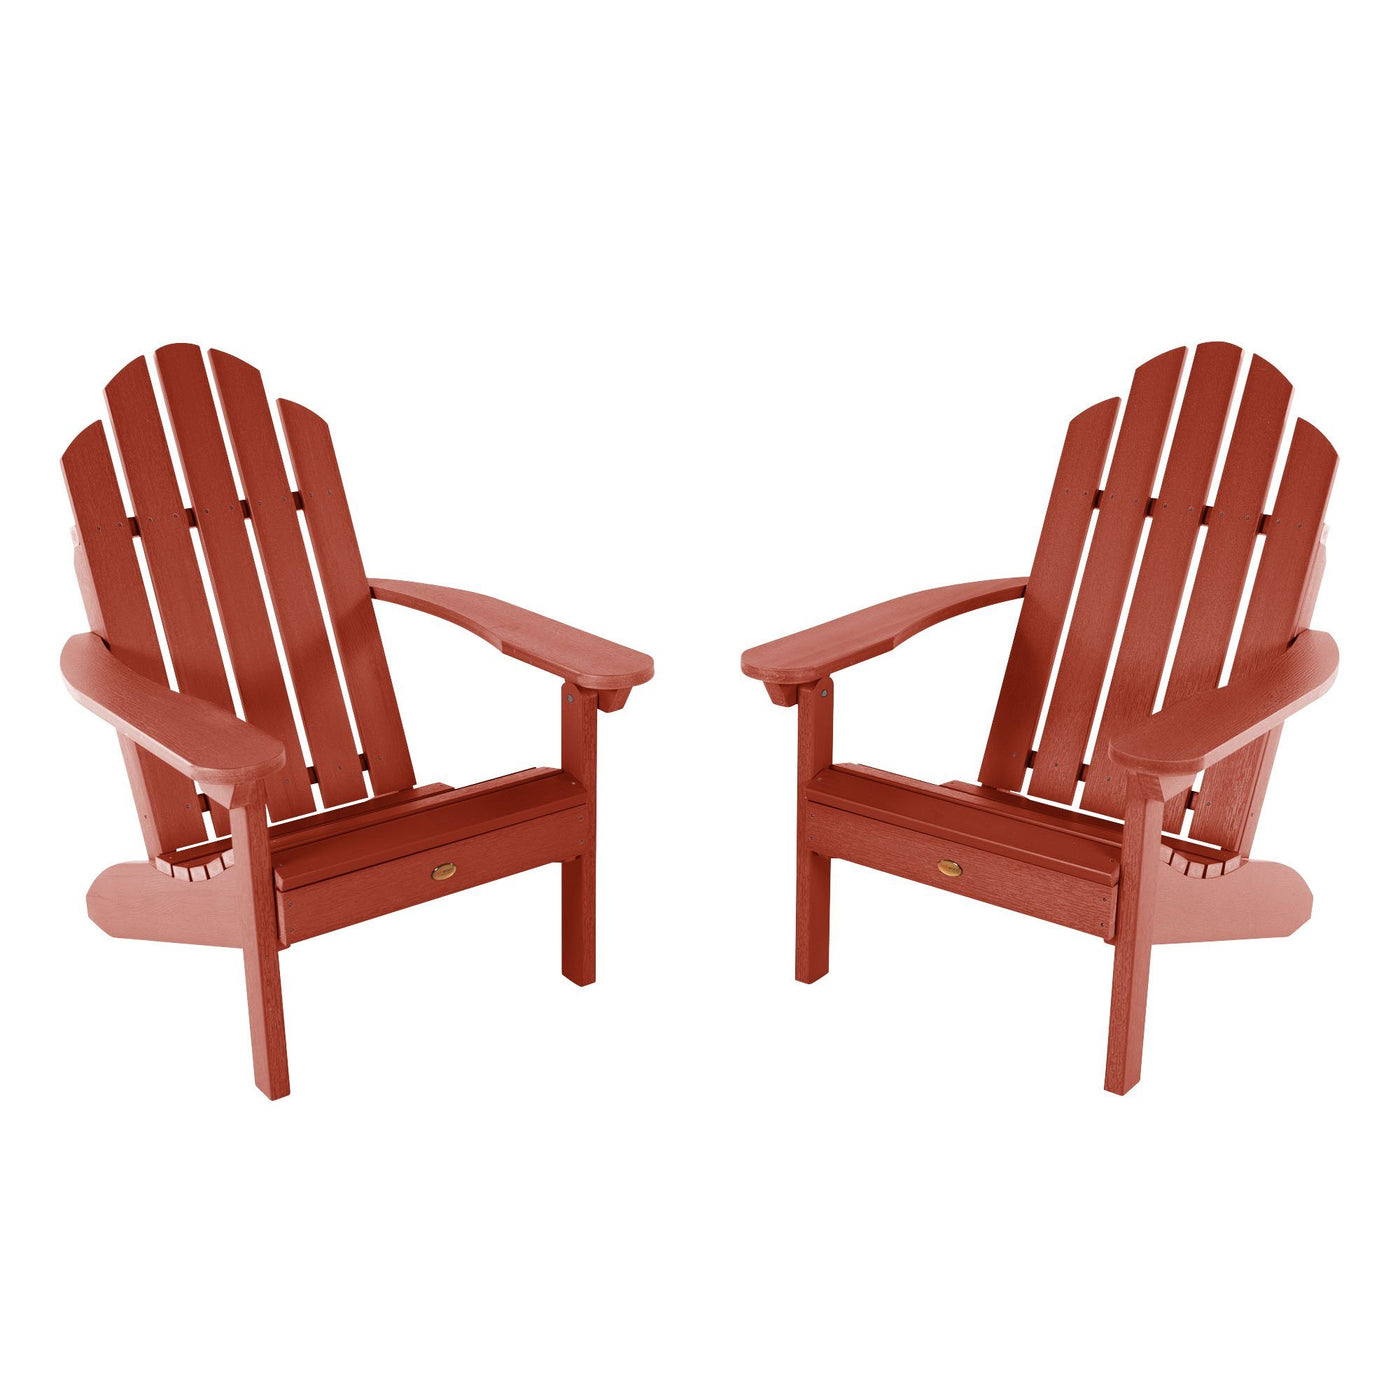 Set of Two Classic Westport Adirondack Chairs Highwood USA Rustic Red 